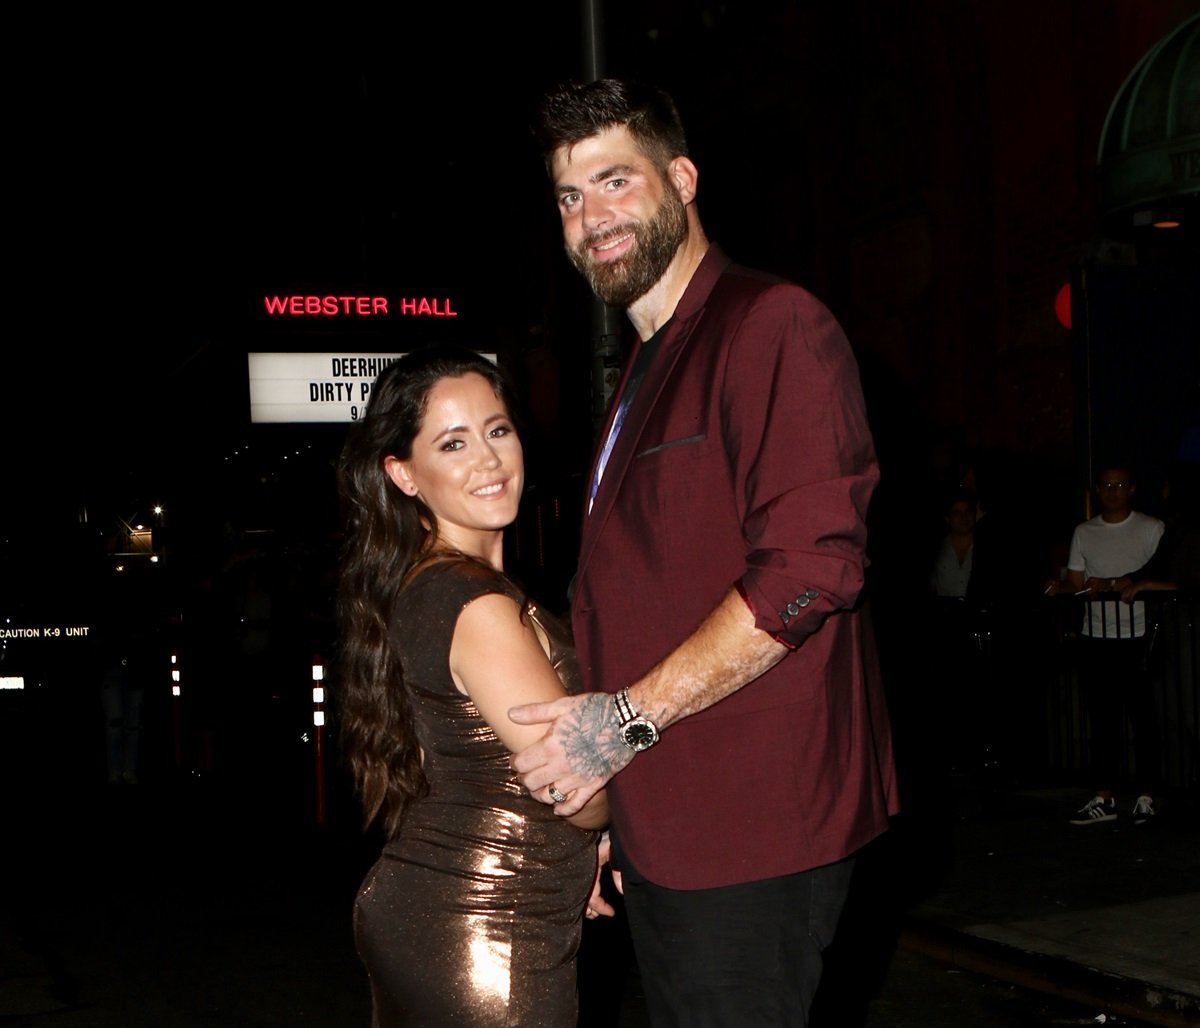 Jenelle Evans and David Eason are seen on September 11, 2019 in New York City. Jenelle Evans' son, Jace Evans has gone missing multiple times since August